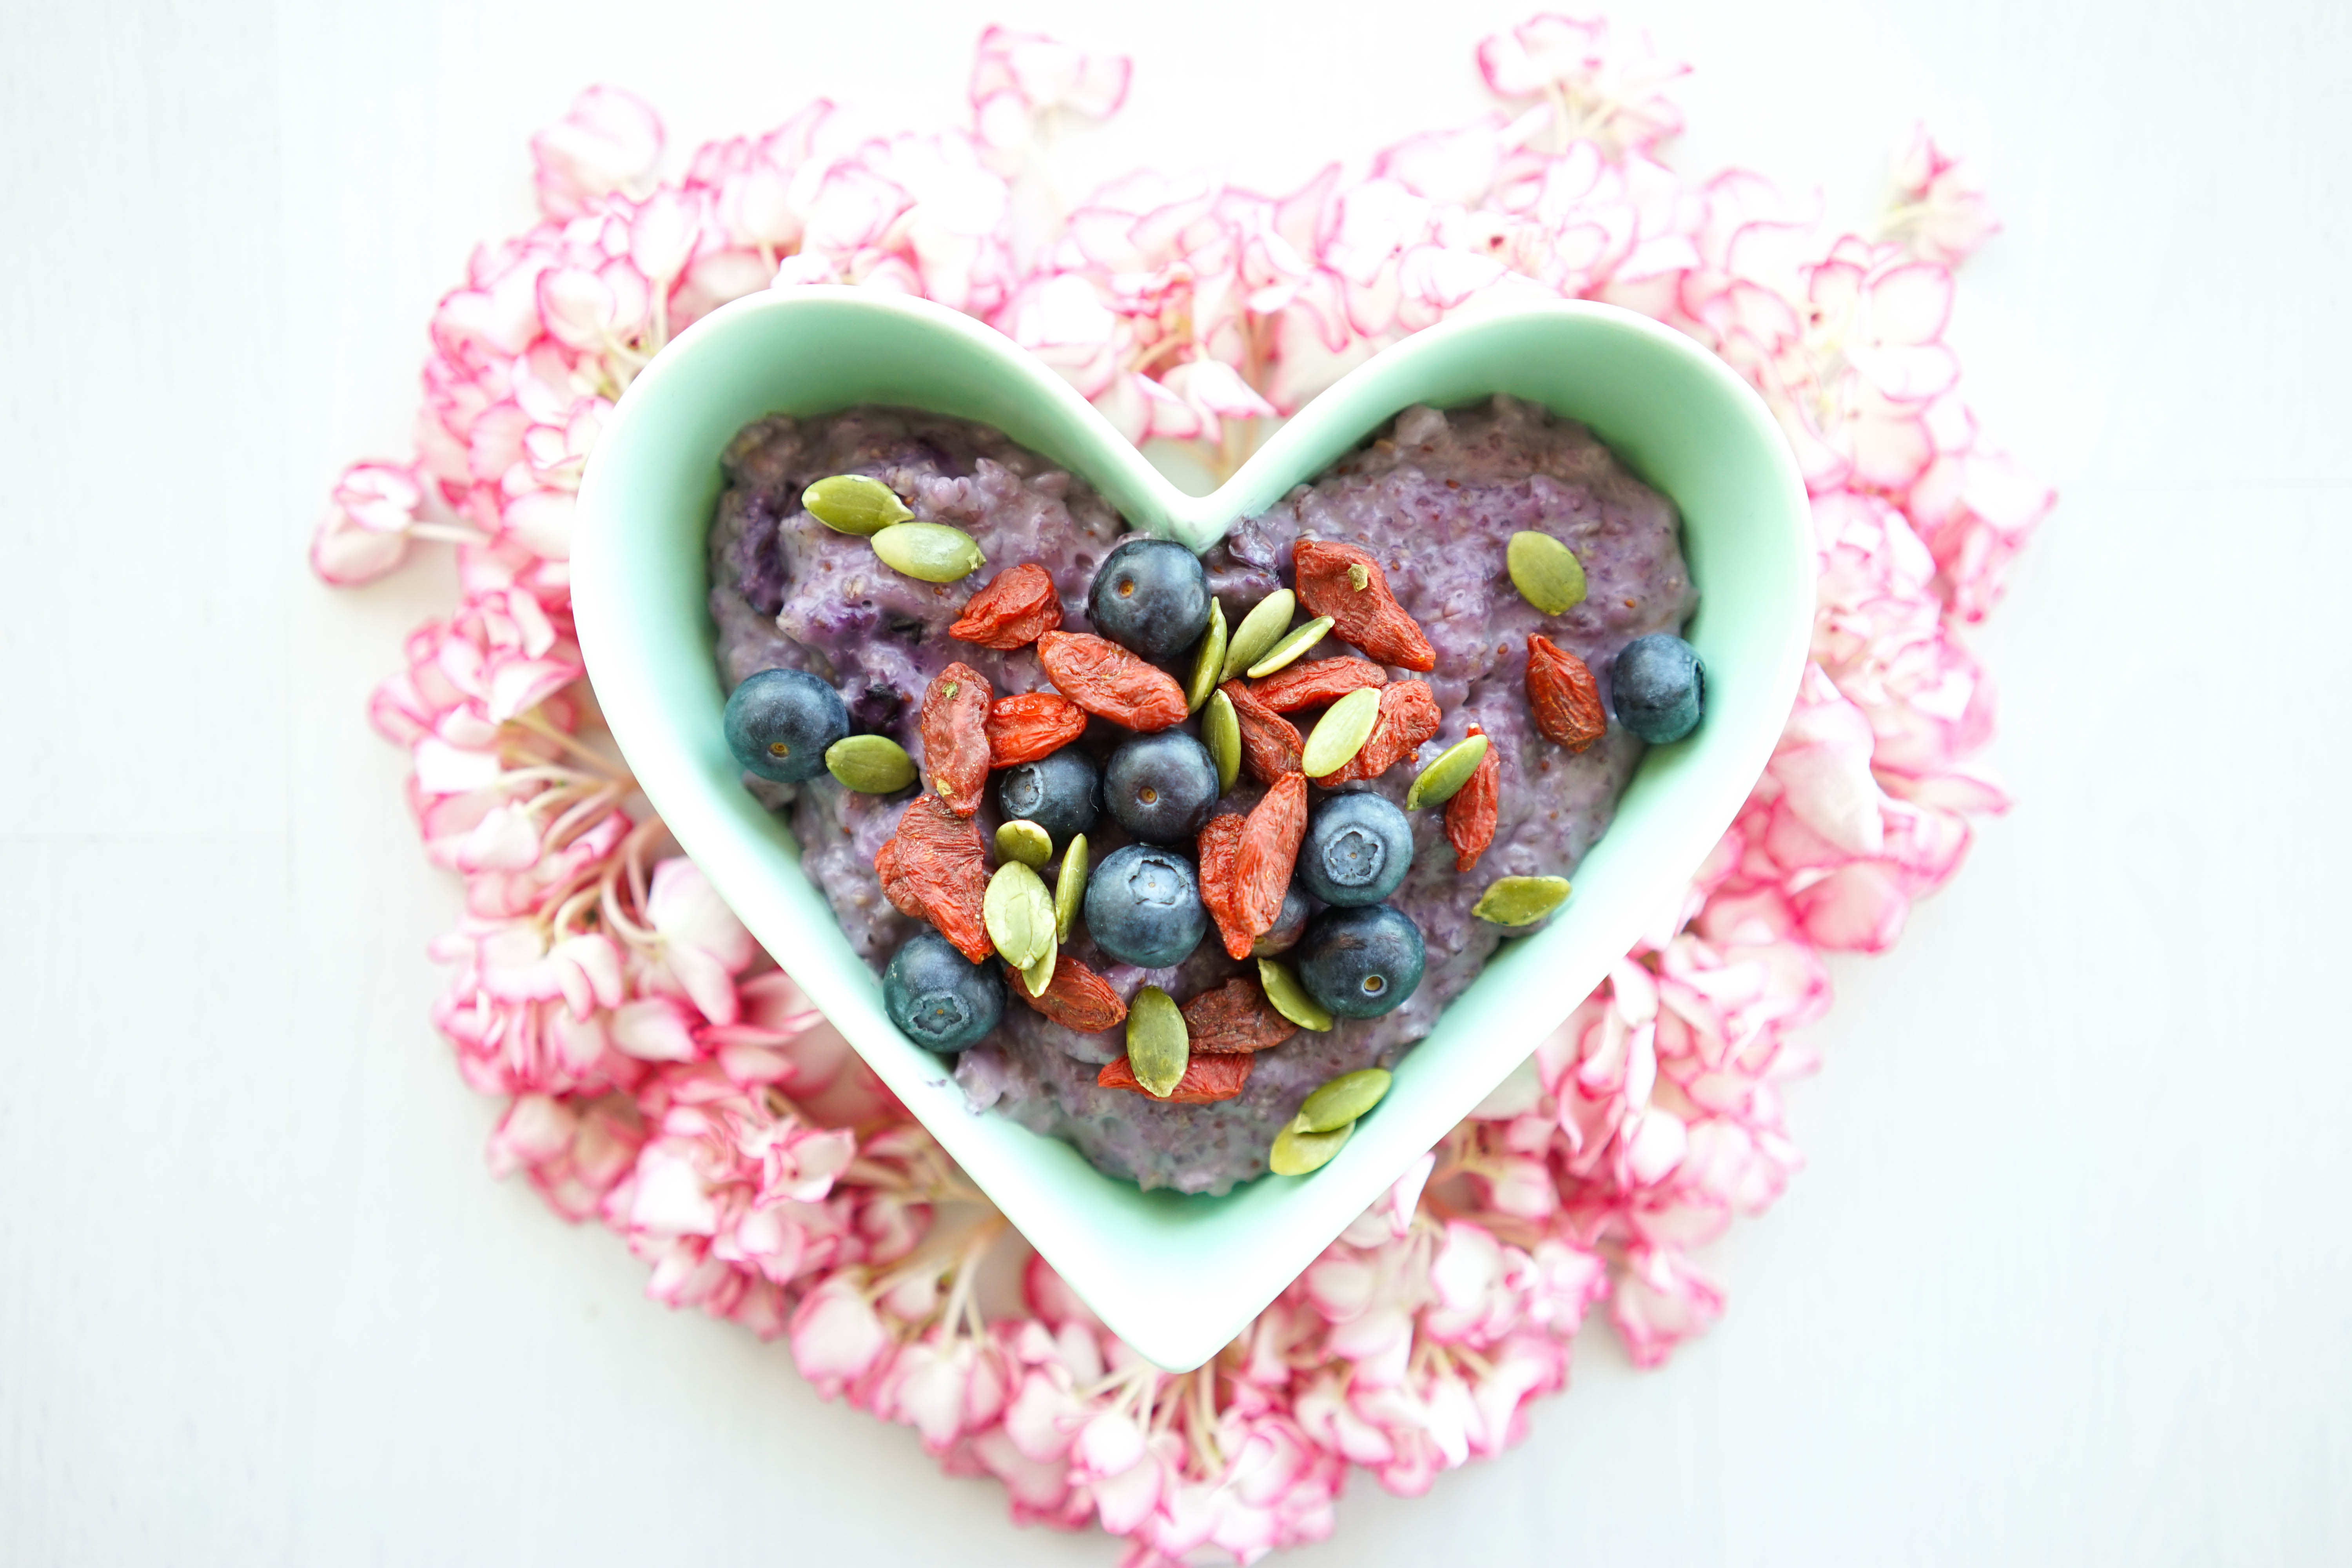 
The practice of blue berry violet porridge, how to do delicious